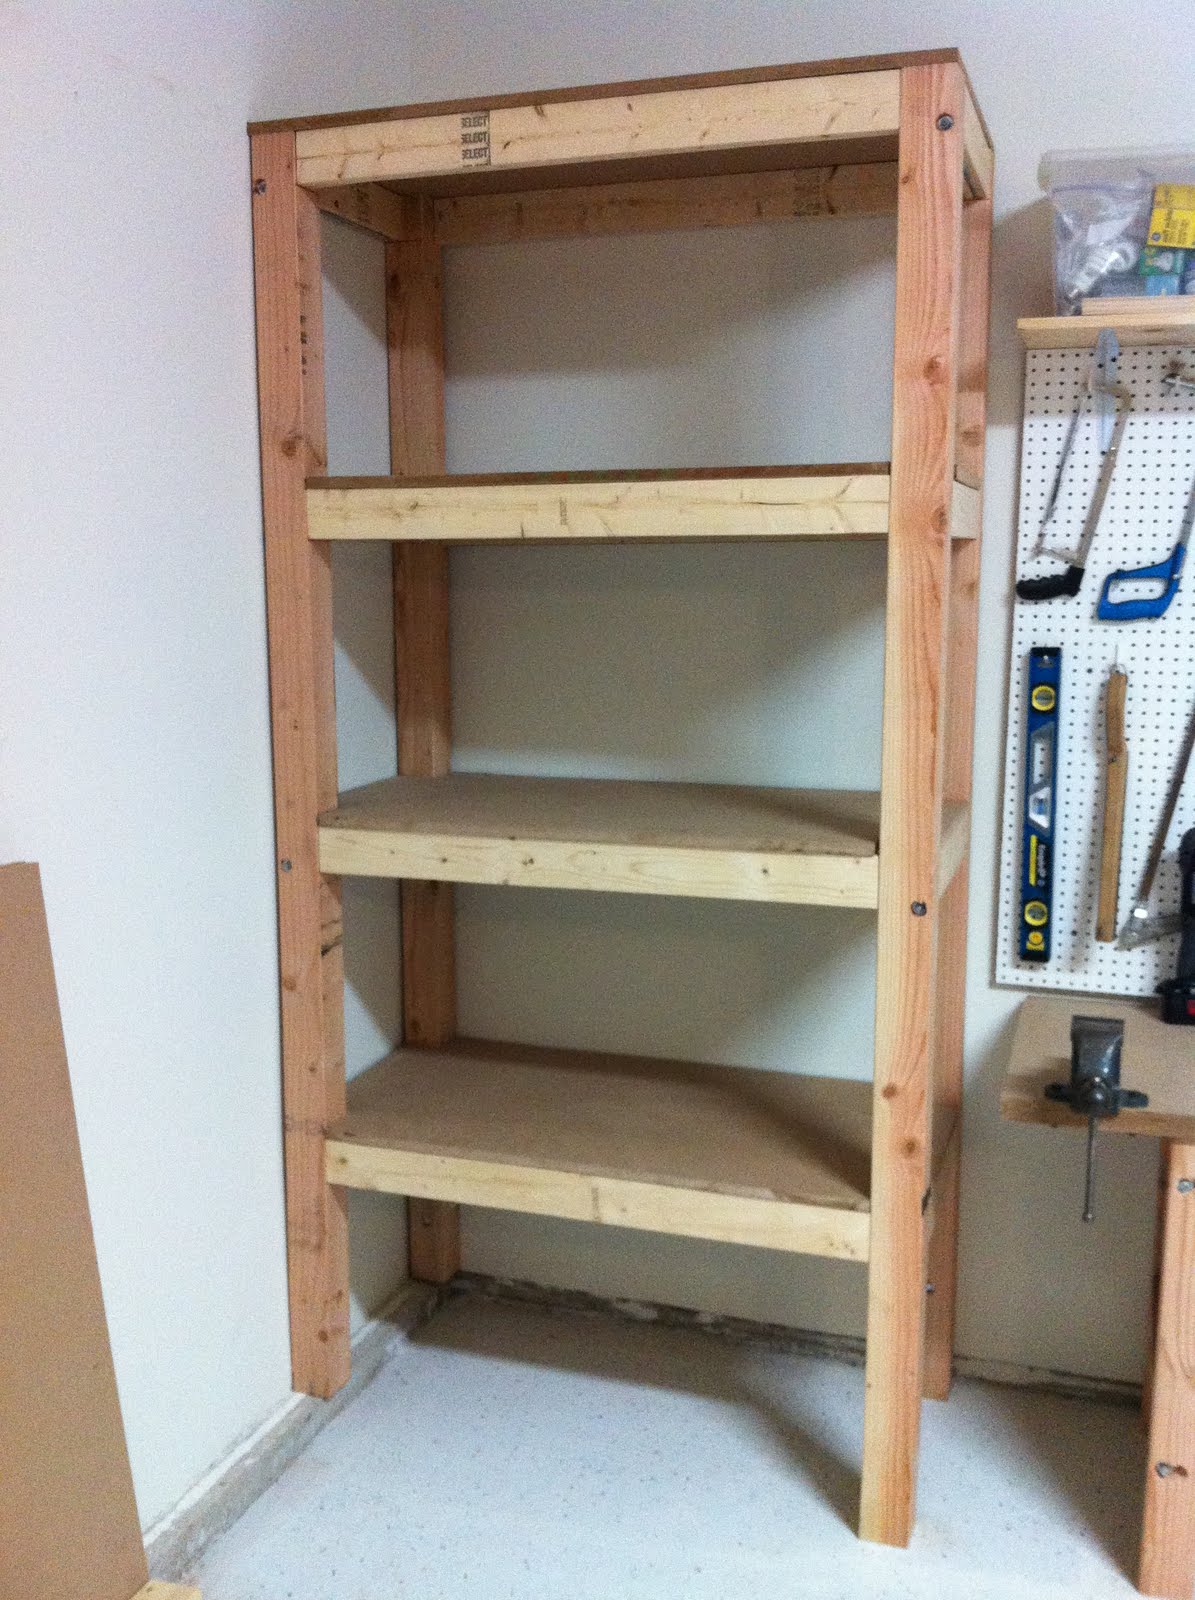 Shelves: 3/4' MDF Board Attached to wall studs with 5/16 x 5 lag bolts